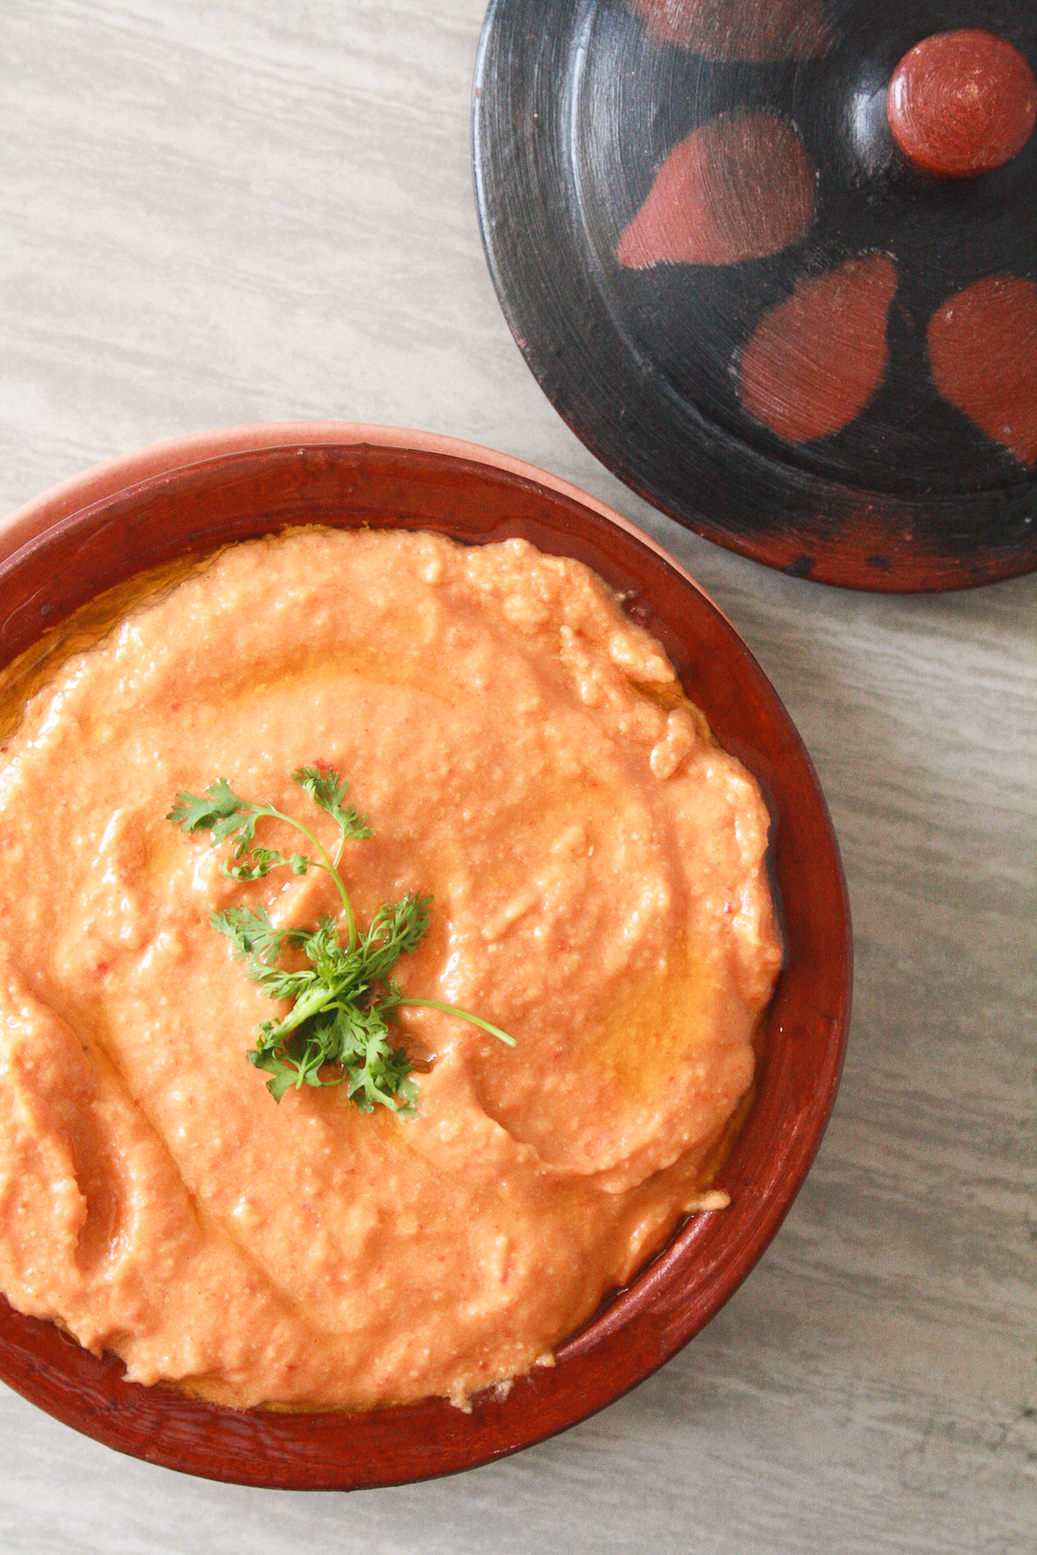 Classic hummus taken up a notch with juicy roasted peppers, served with soft and fluffy homemade pita!